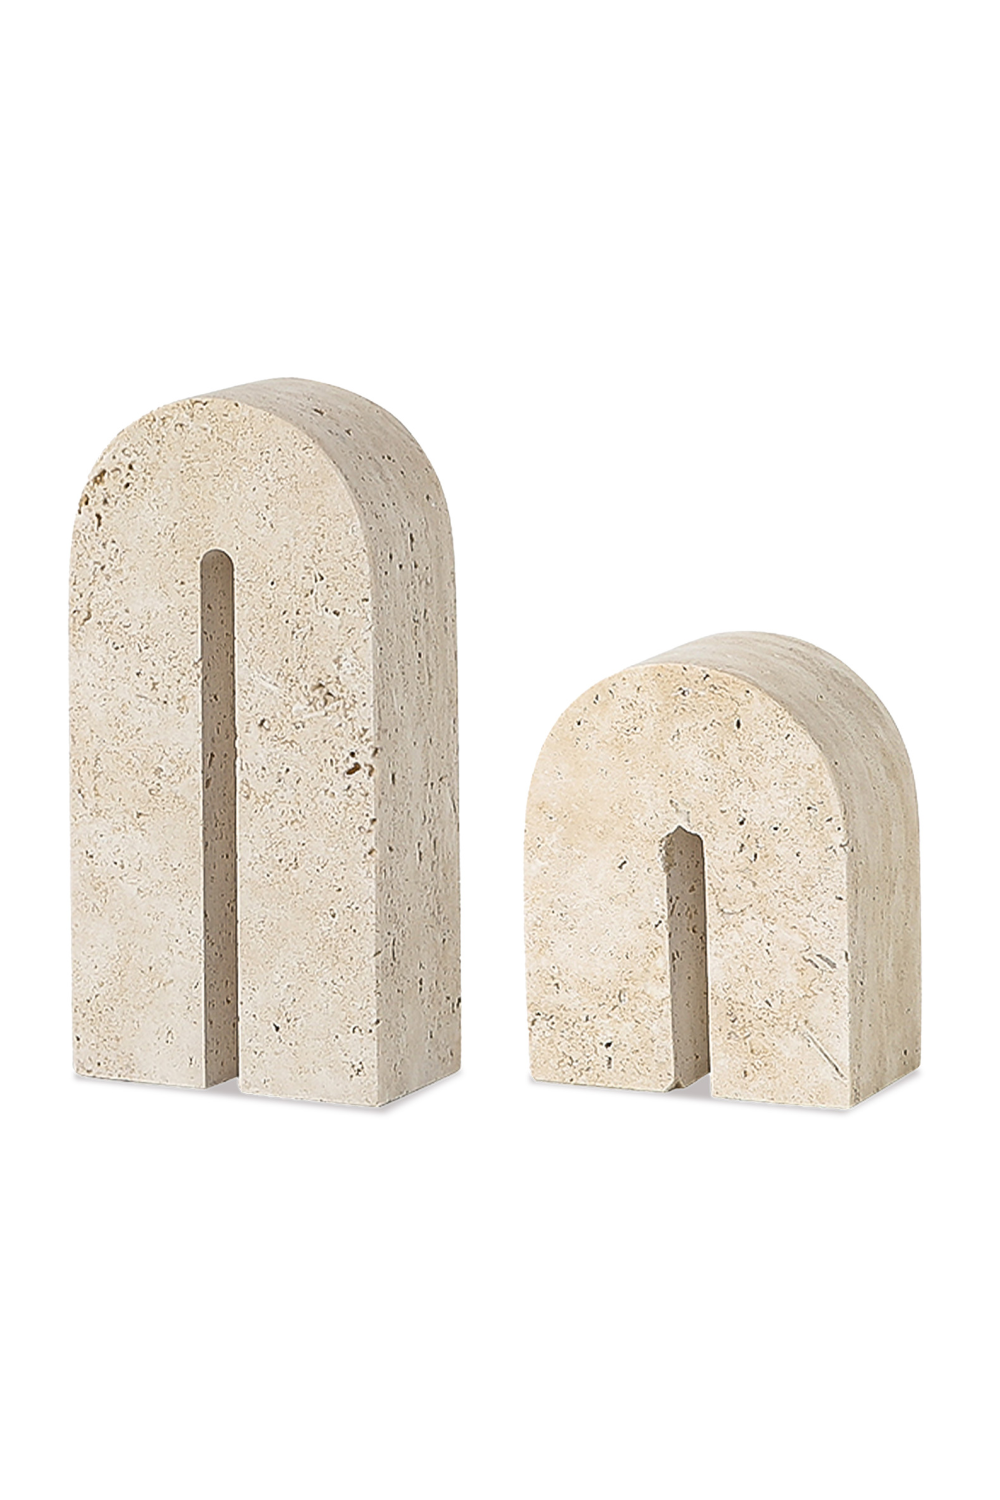 Beige Travertine Arched Sculpture | Liang & Eimil Dolmi | Oroa.com